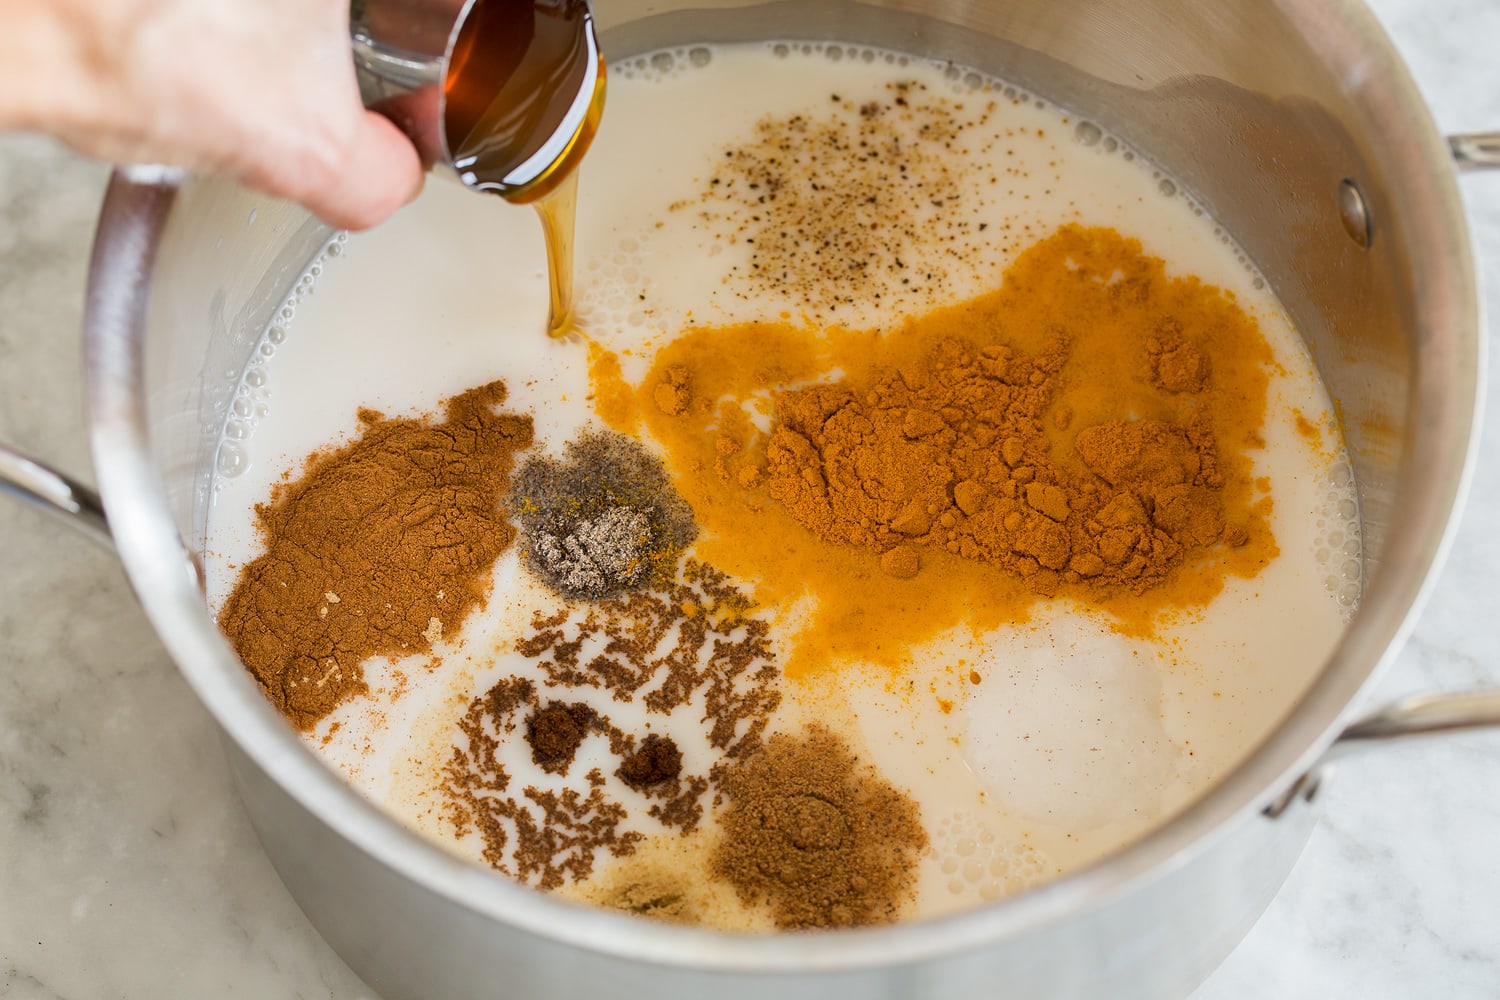 Showing how to make golden milk by mixing milk, spices and sweetener in pot.